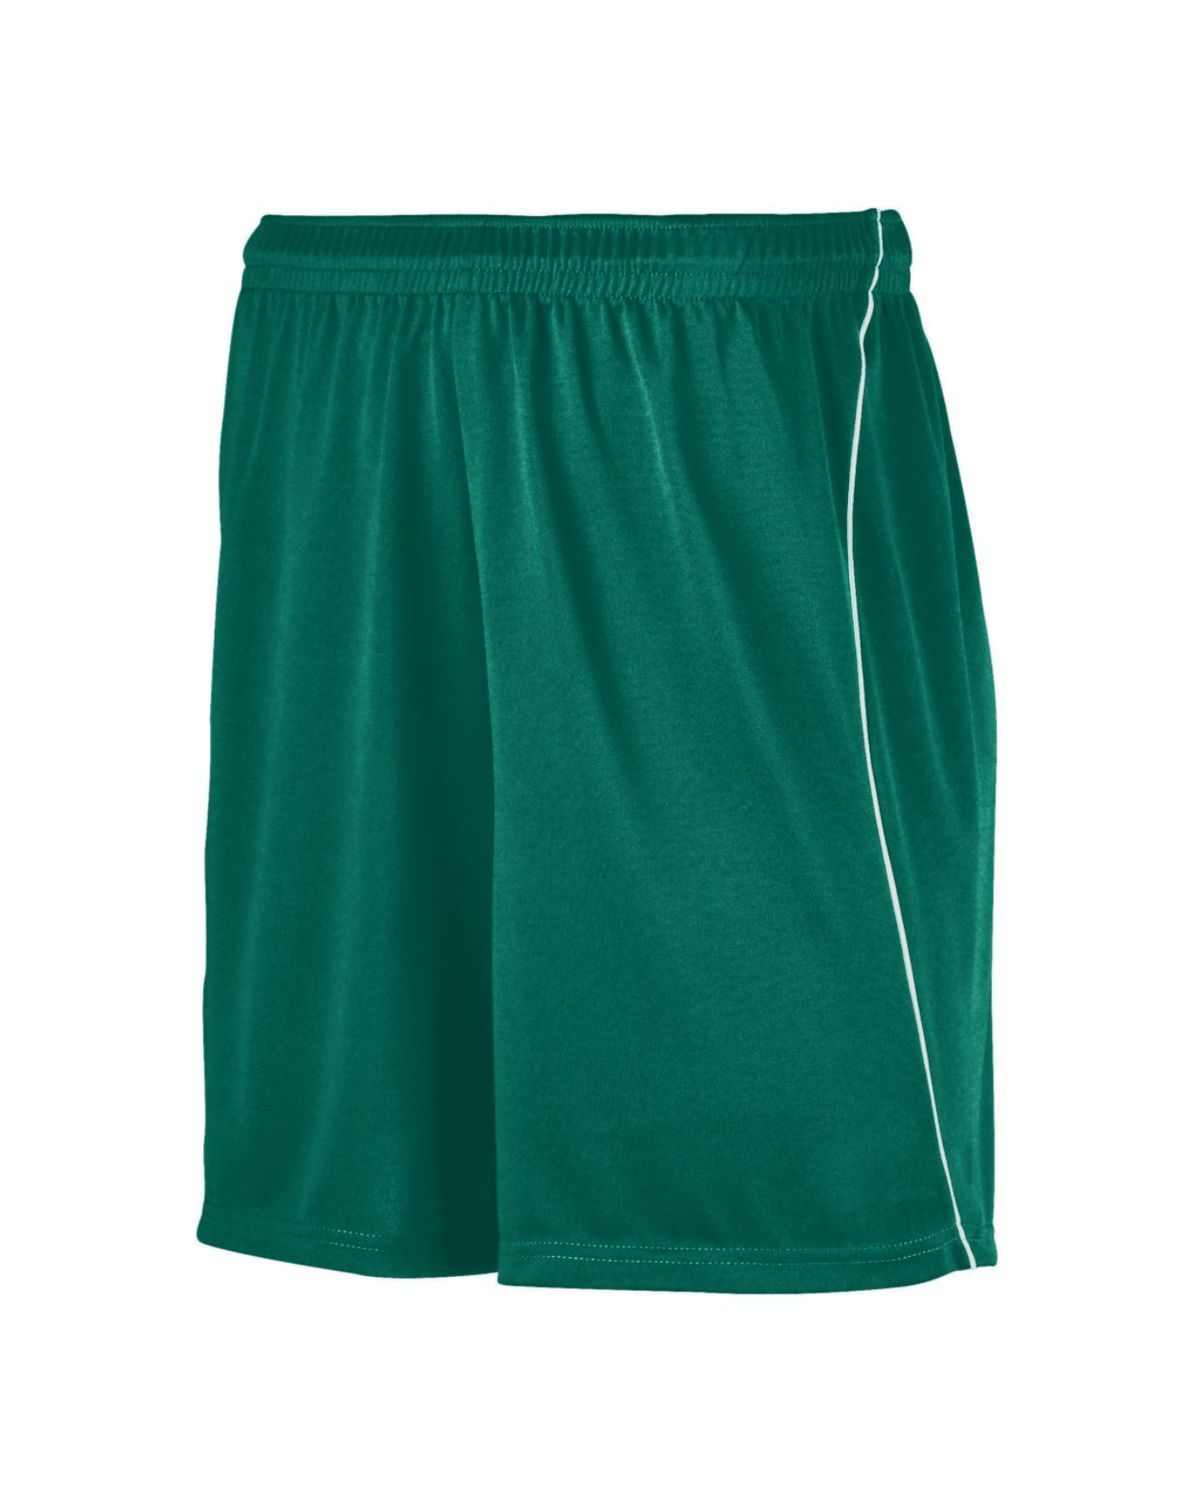 'Augusta 460 Wicking Soccer Short With Piping'